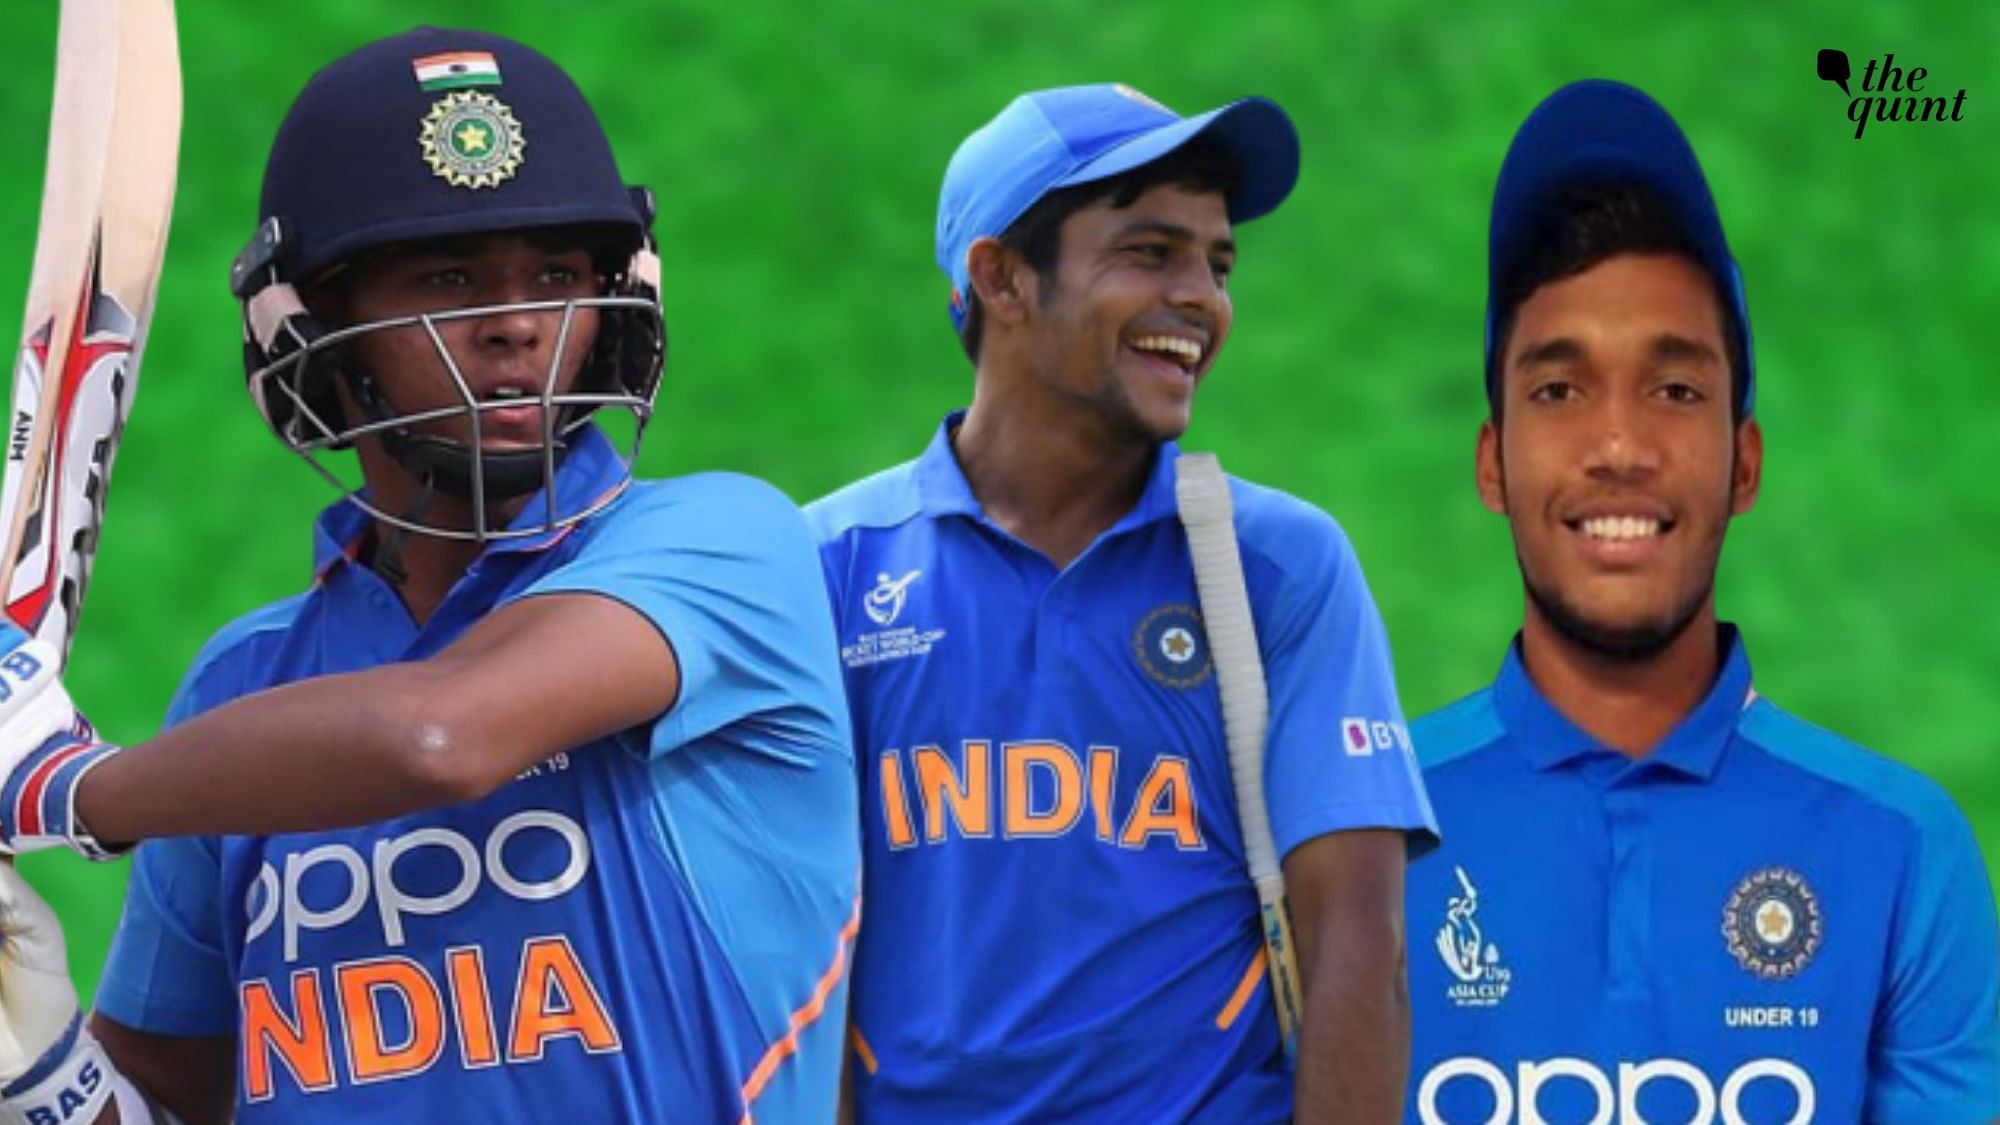 Yashasvi Jaiswal (left) and Atharva Ankolekar (right) have played pivotal roles for the Priyam Garg-led India U-19 side to reach the final of the World Cup.